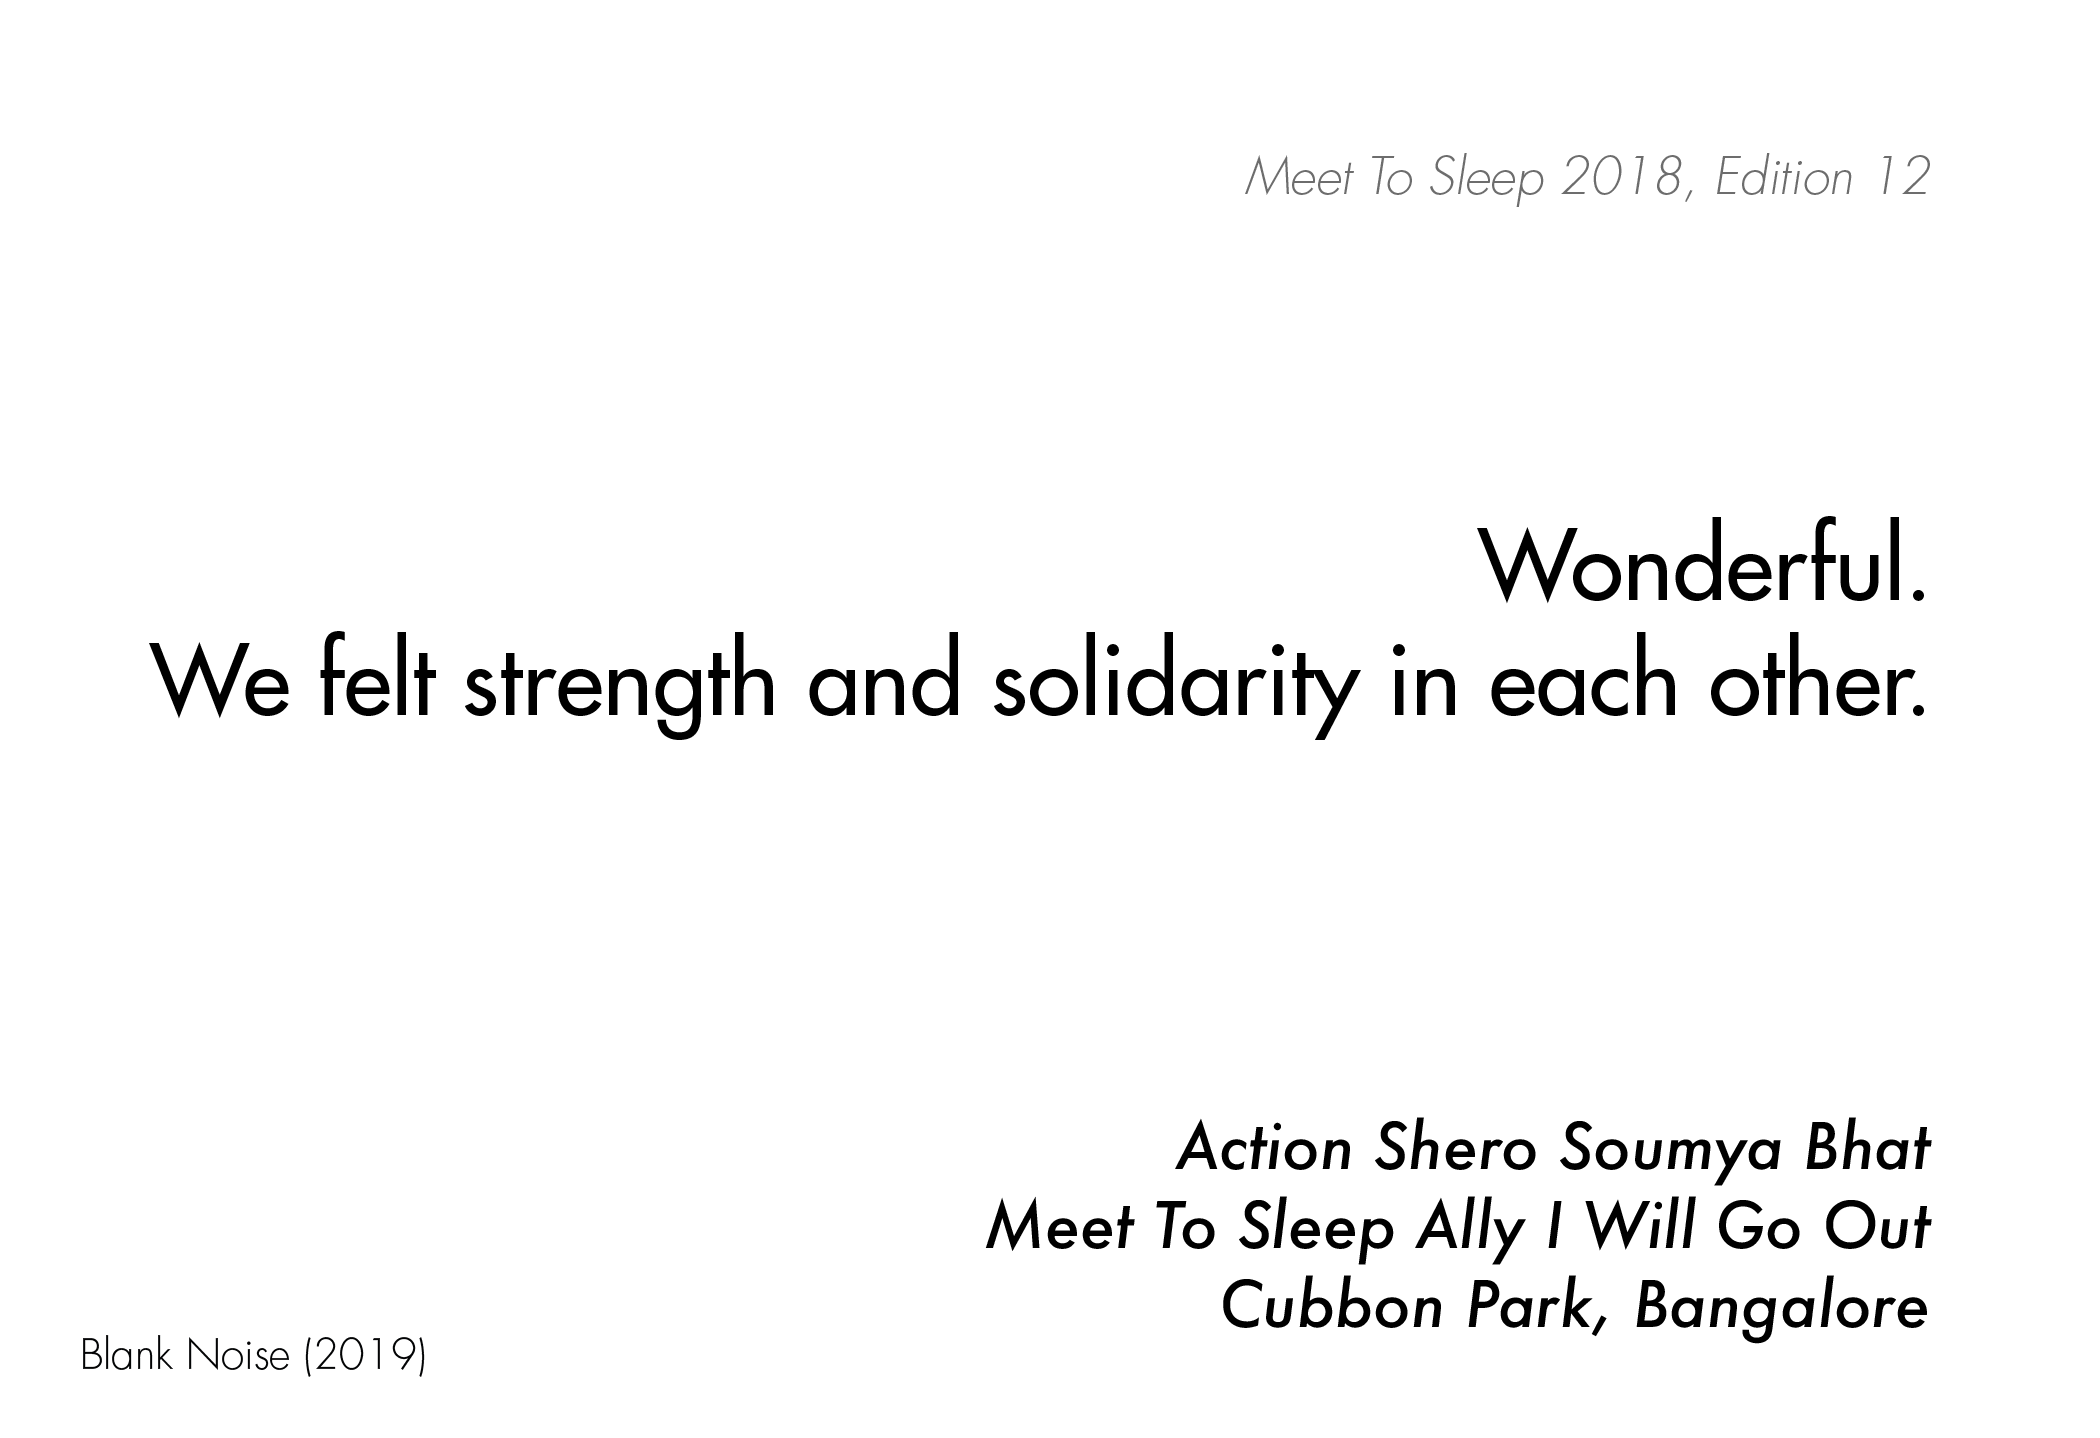 MTS 2018 Quotes -74.png